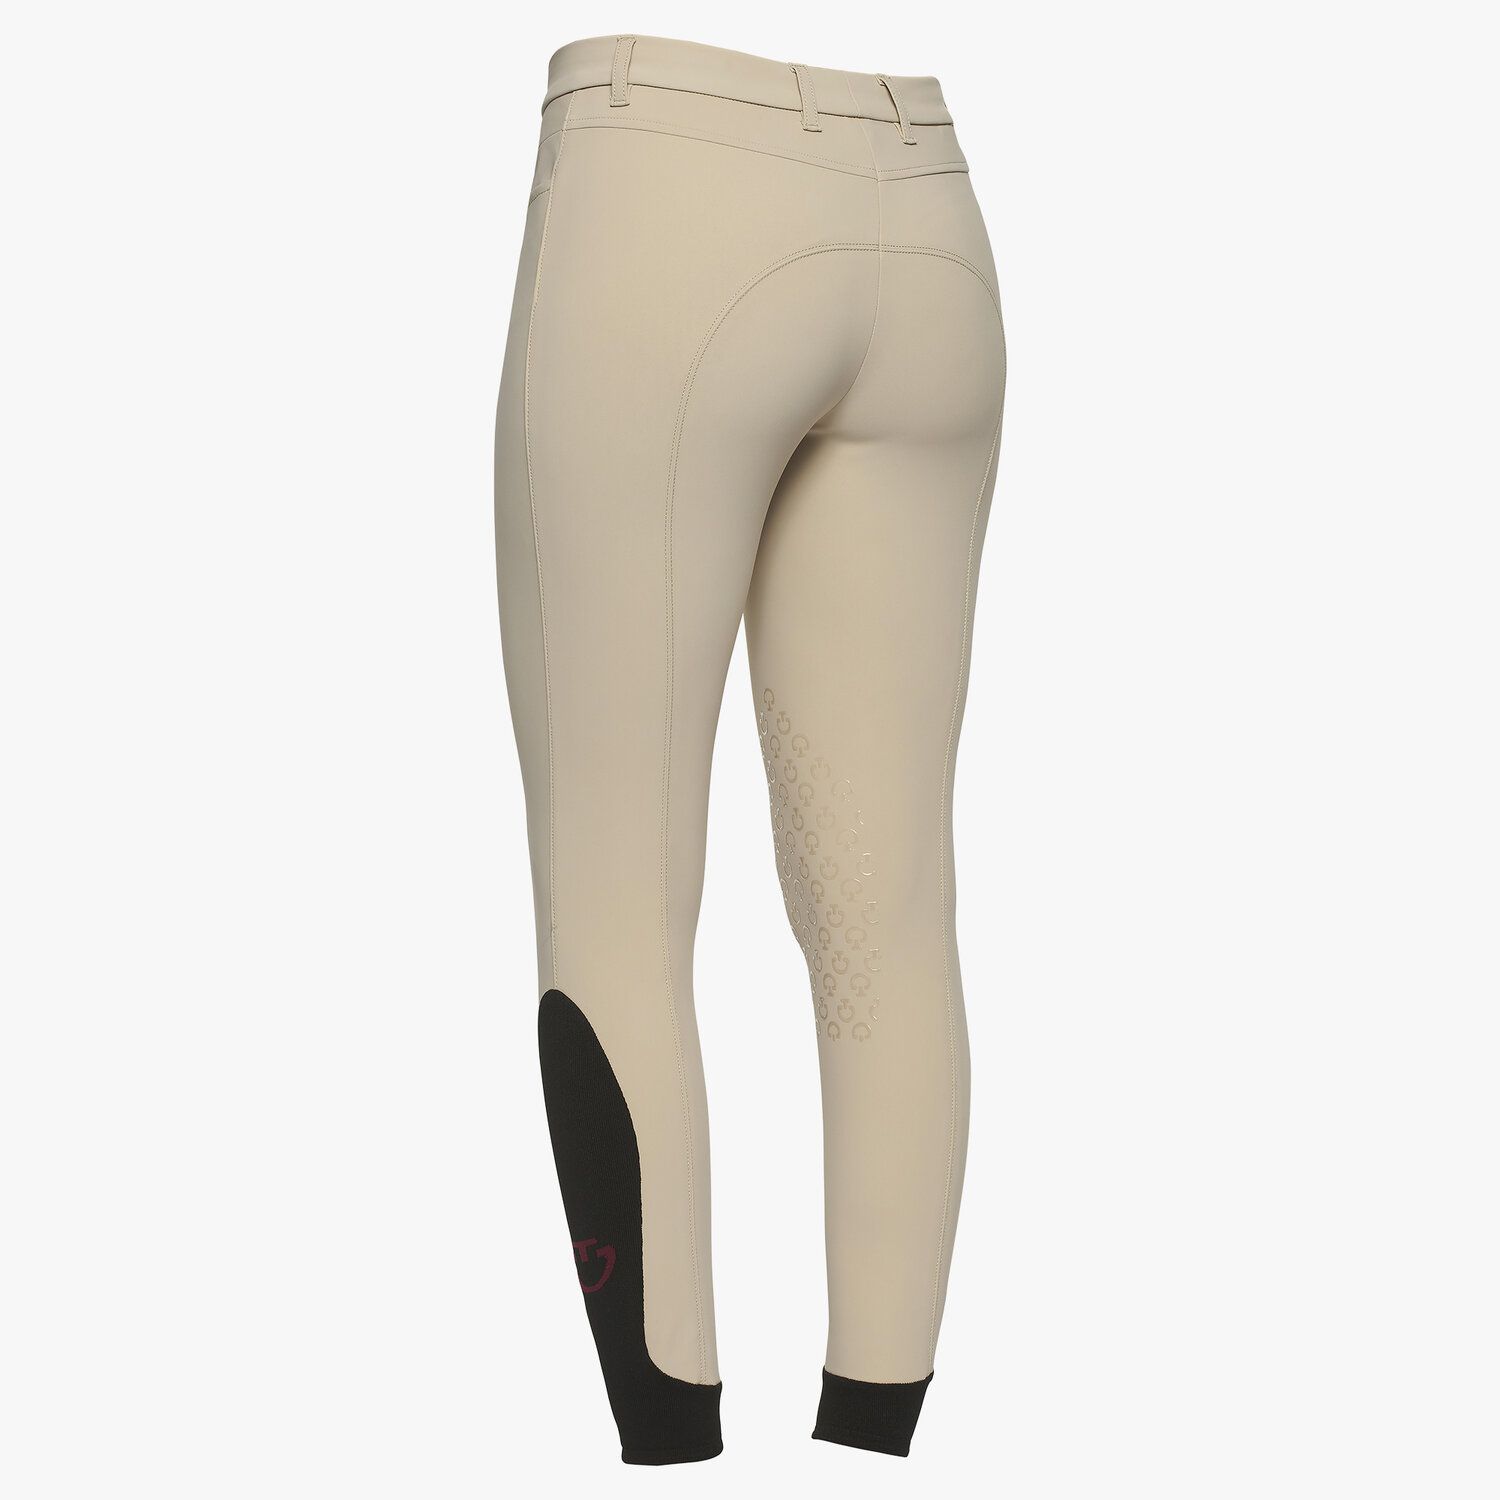 Ladies Horse Riding Tights Very Comfy & Stretchable With Anti Slip Silicone  Seat at Rs 1200/piece, Riding Breeches in Kanpur